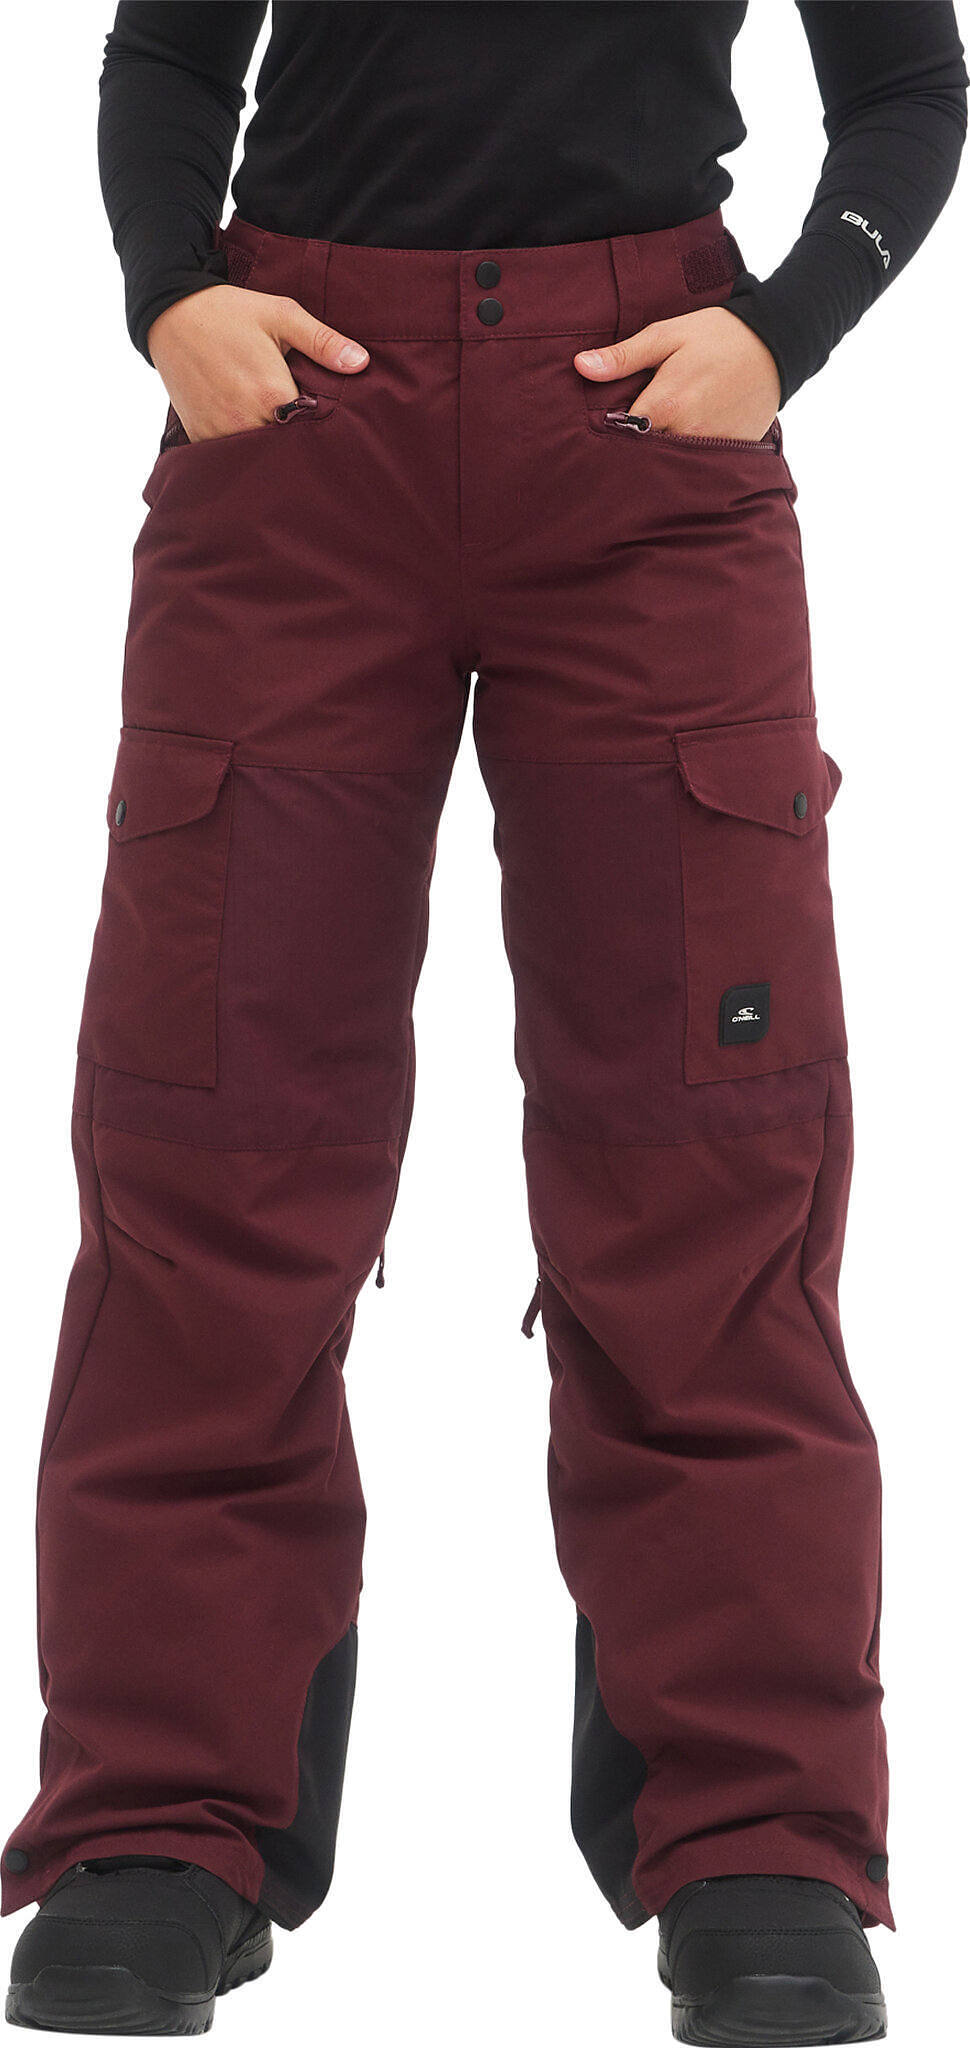 Buy Basic Cargo Utility Jogger Men's Jeans & Pants from Buyers Picks. Find  Buyers Picks fashion & more at